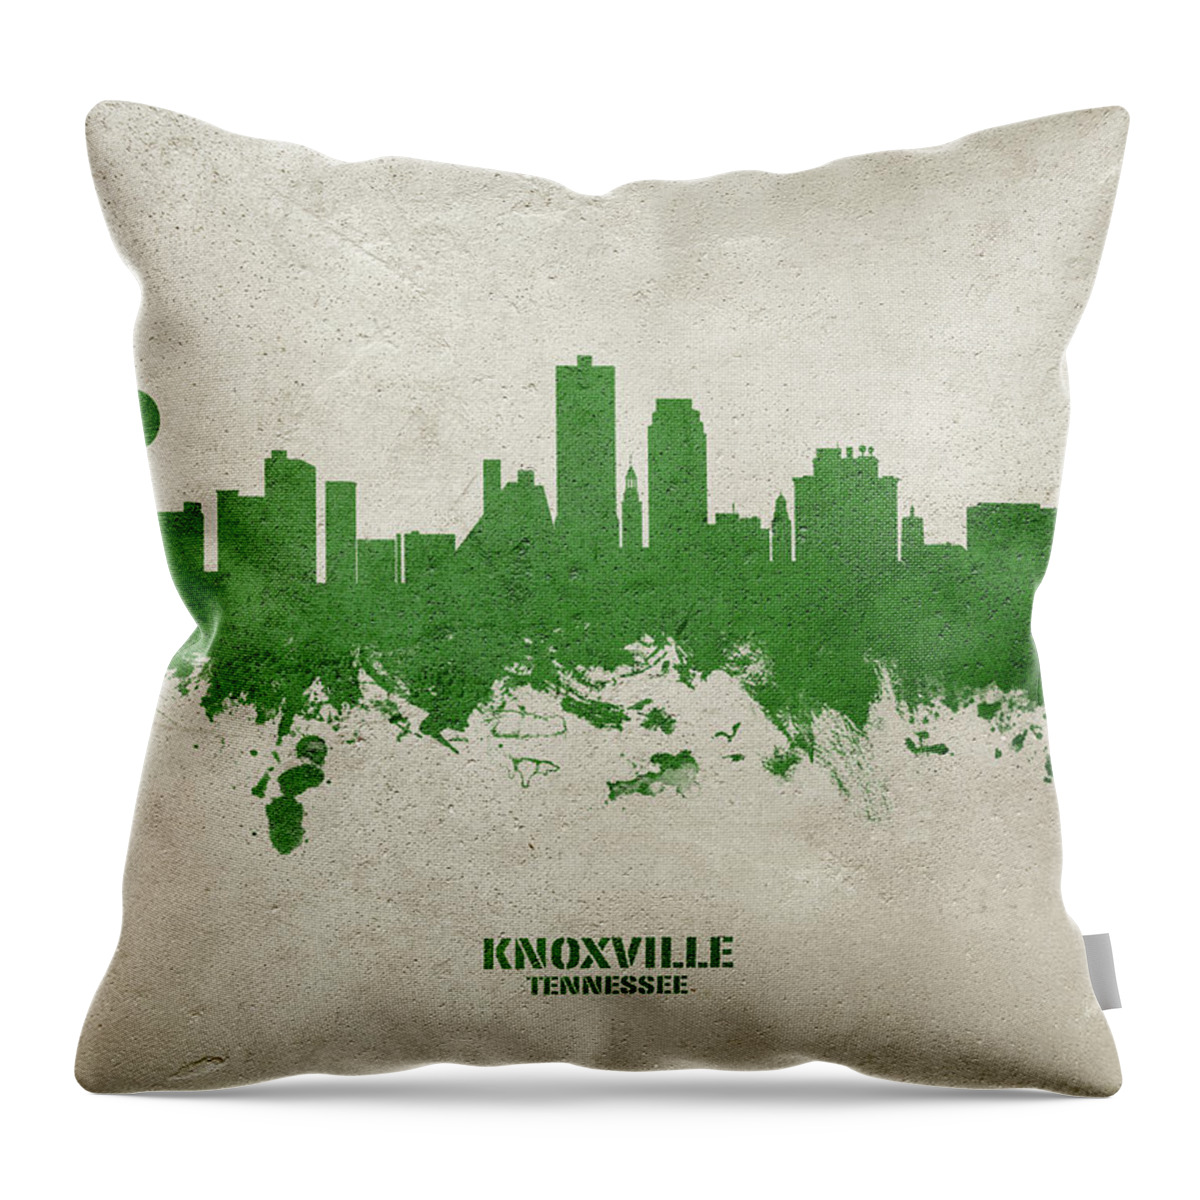 Knoxville Throw Pillow featuring the digital art Knoxville Tennessee Skyline #77 by Michael Tompsett